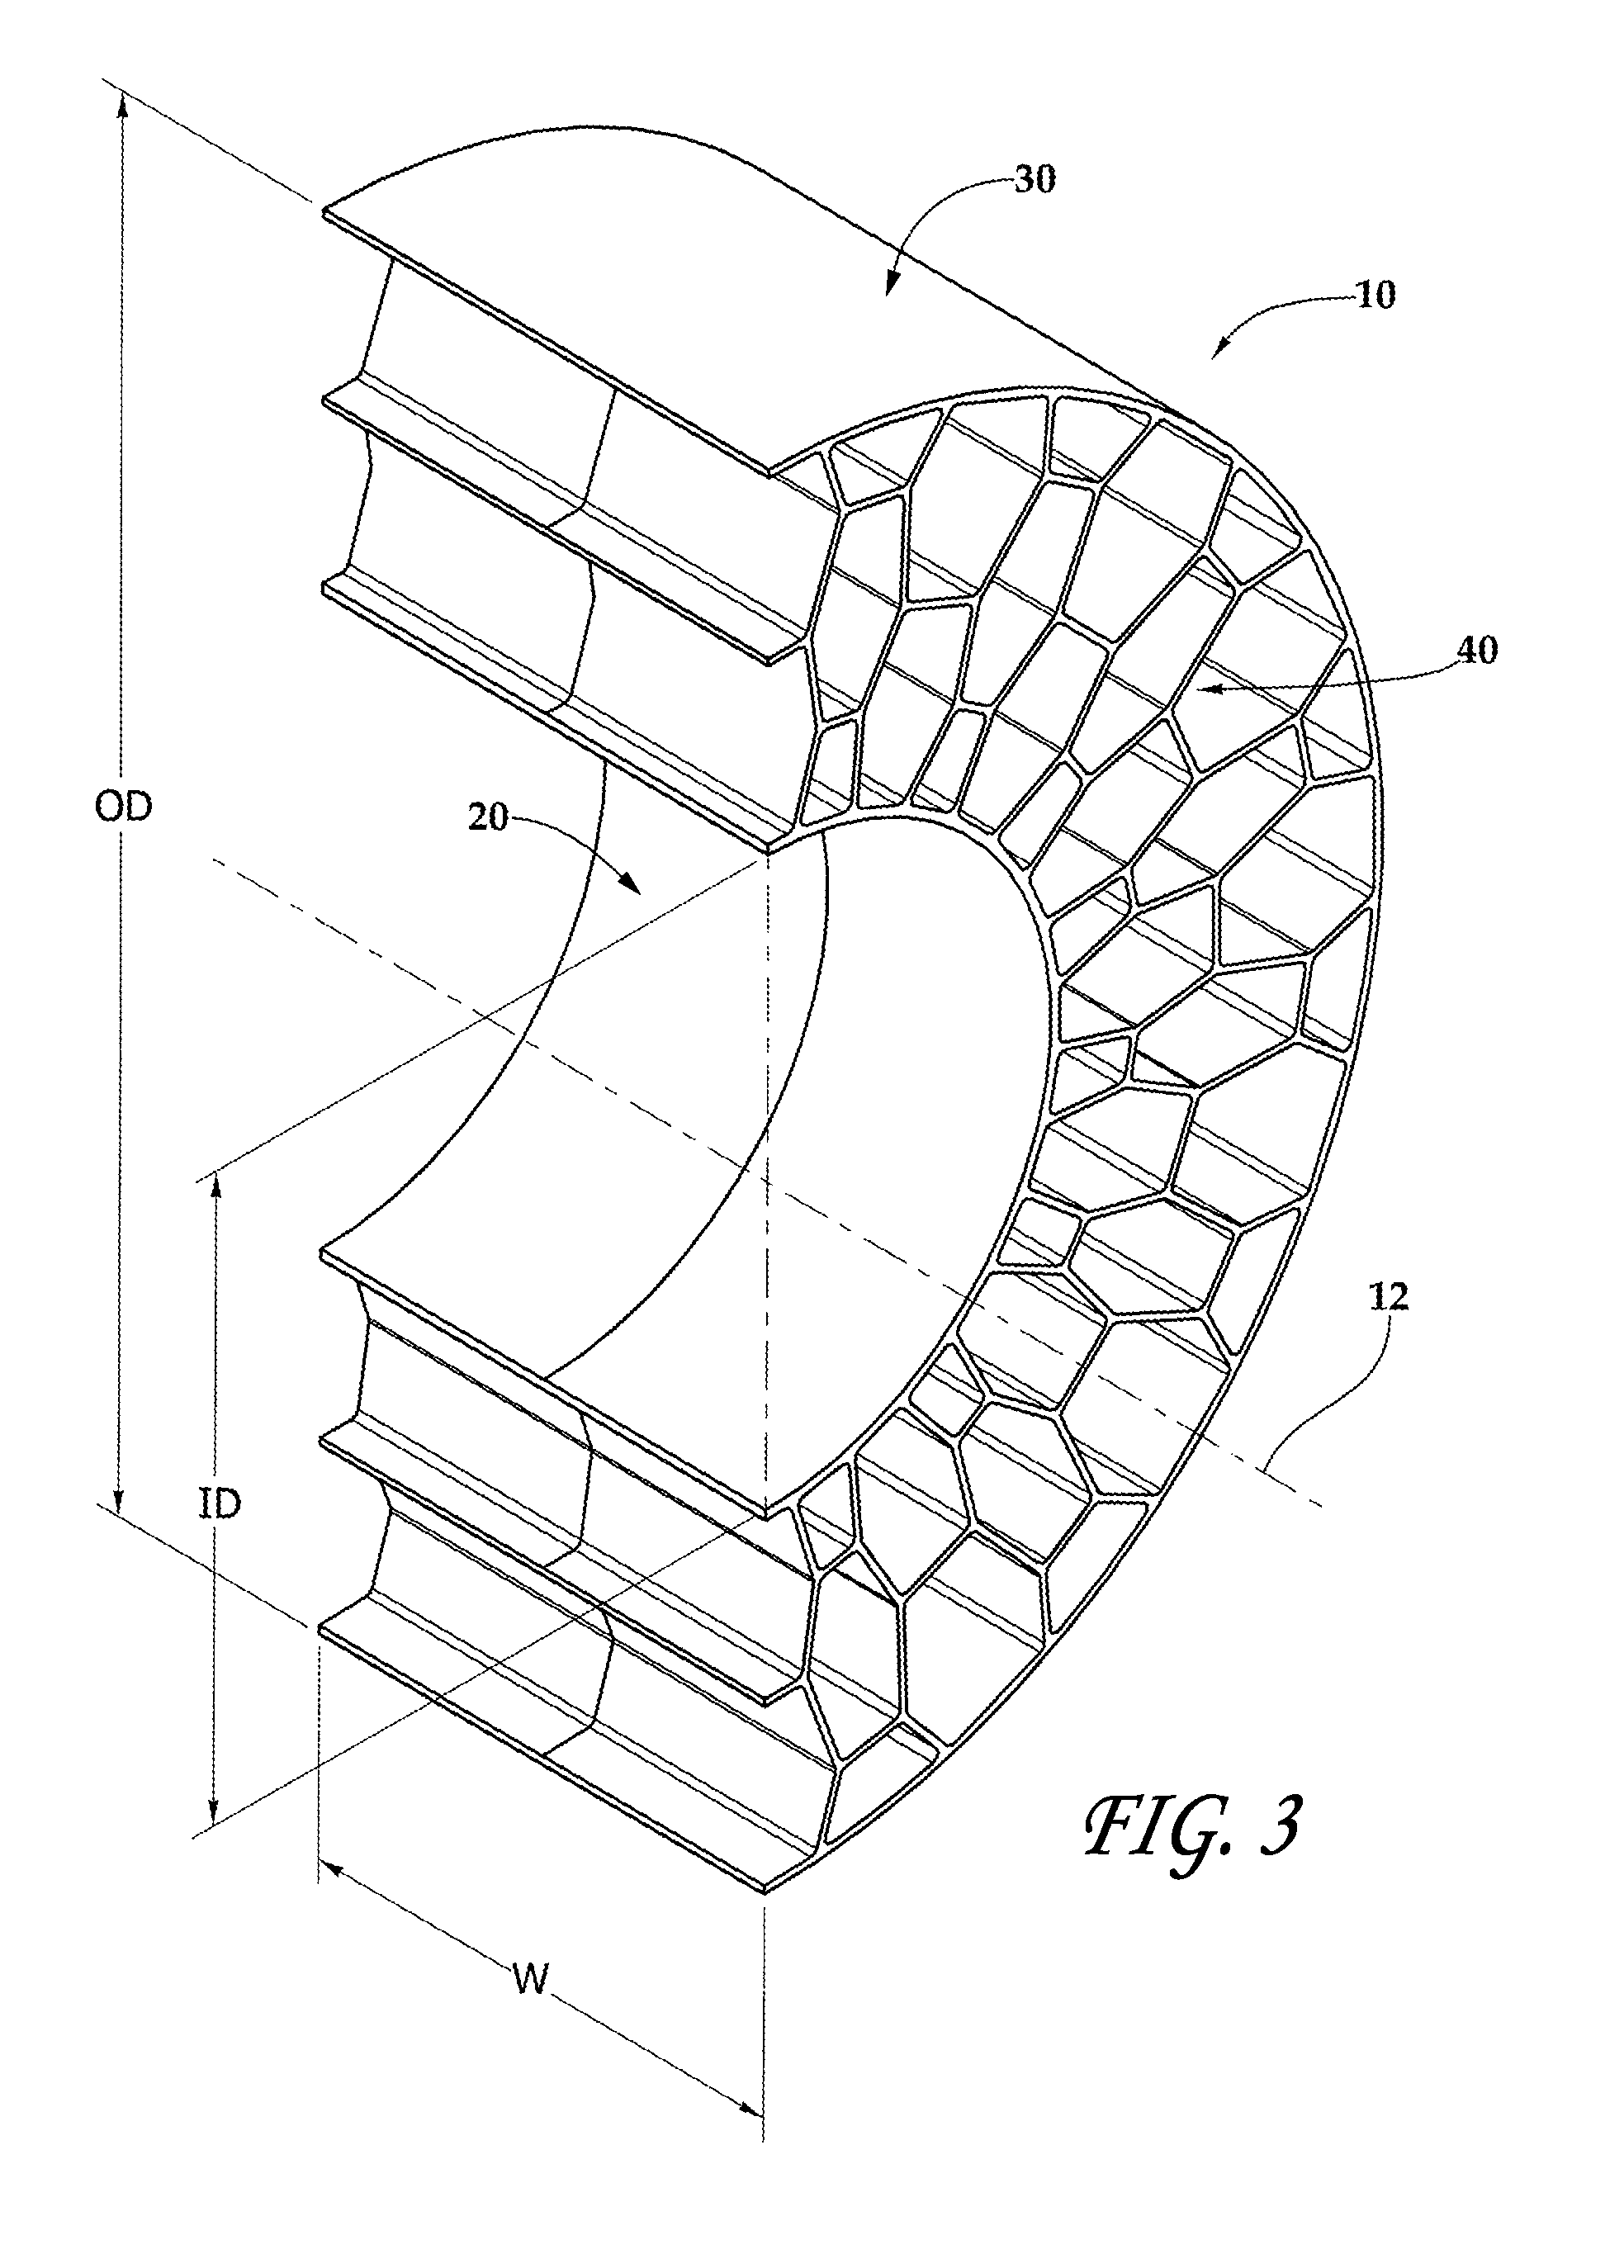 Tension-based non-pneumatic tire